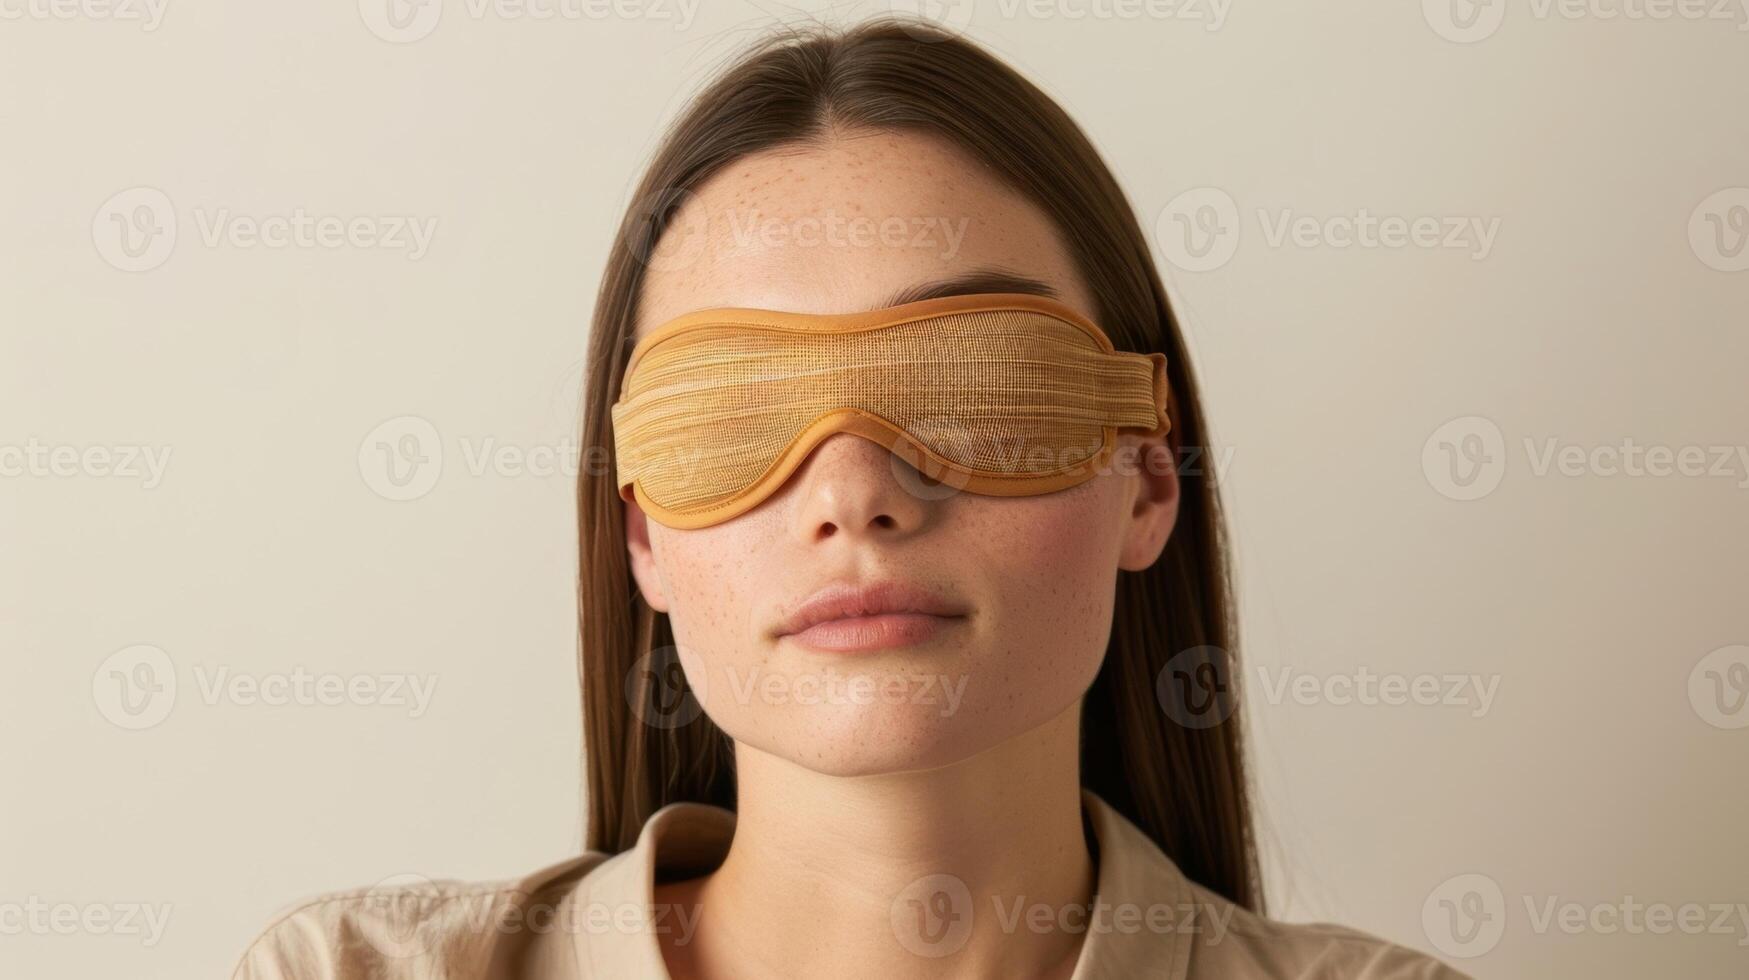 A highquality ecofriendly sleep mask made from sustainably sourced bamboo providing a luxurious and ecoconscious sleep option photo